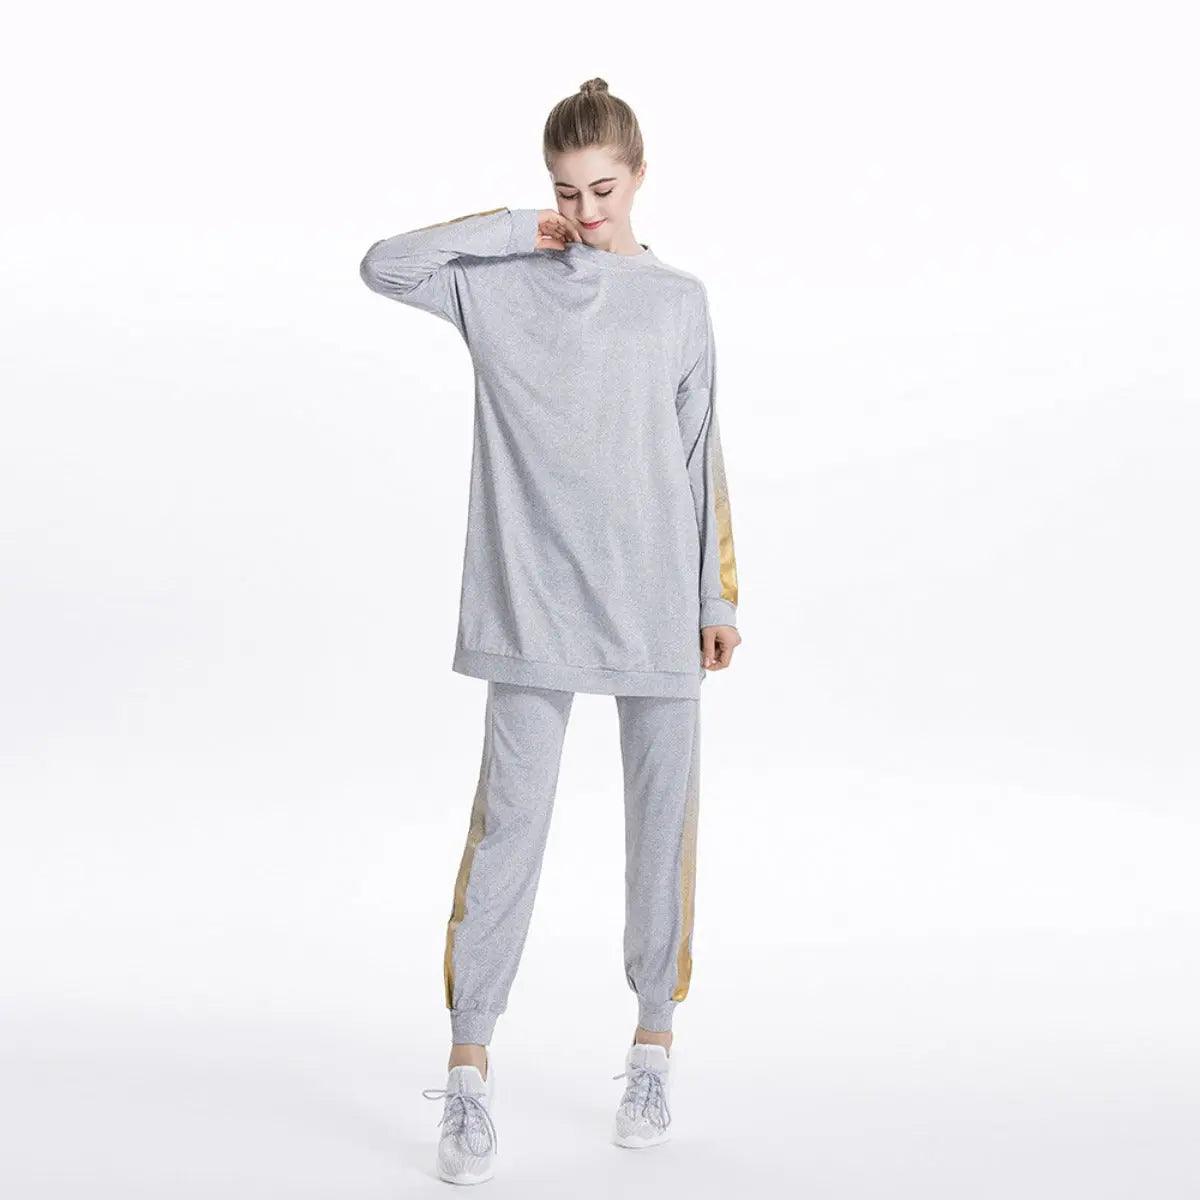 MB008 Two Piece Outfits Long Sleeve Crewneck Sweatsuit with Jogger Pants Mariam's Collection